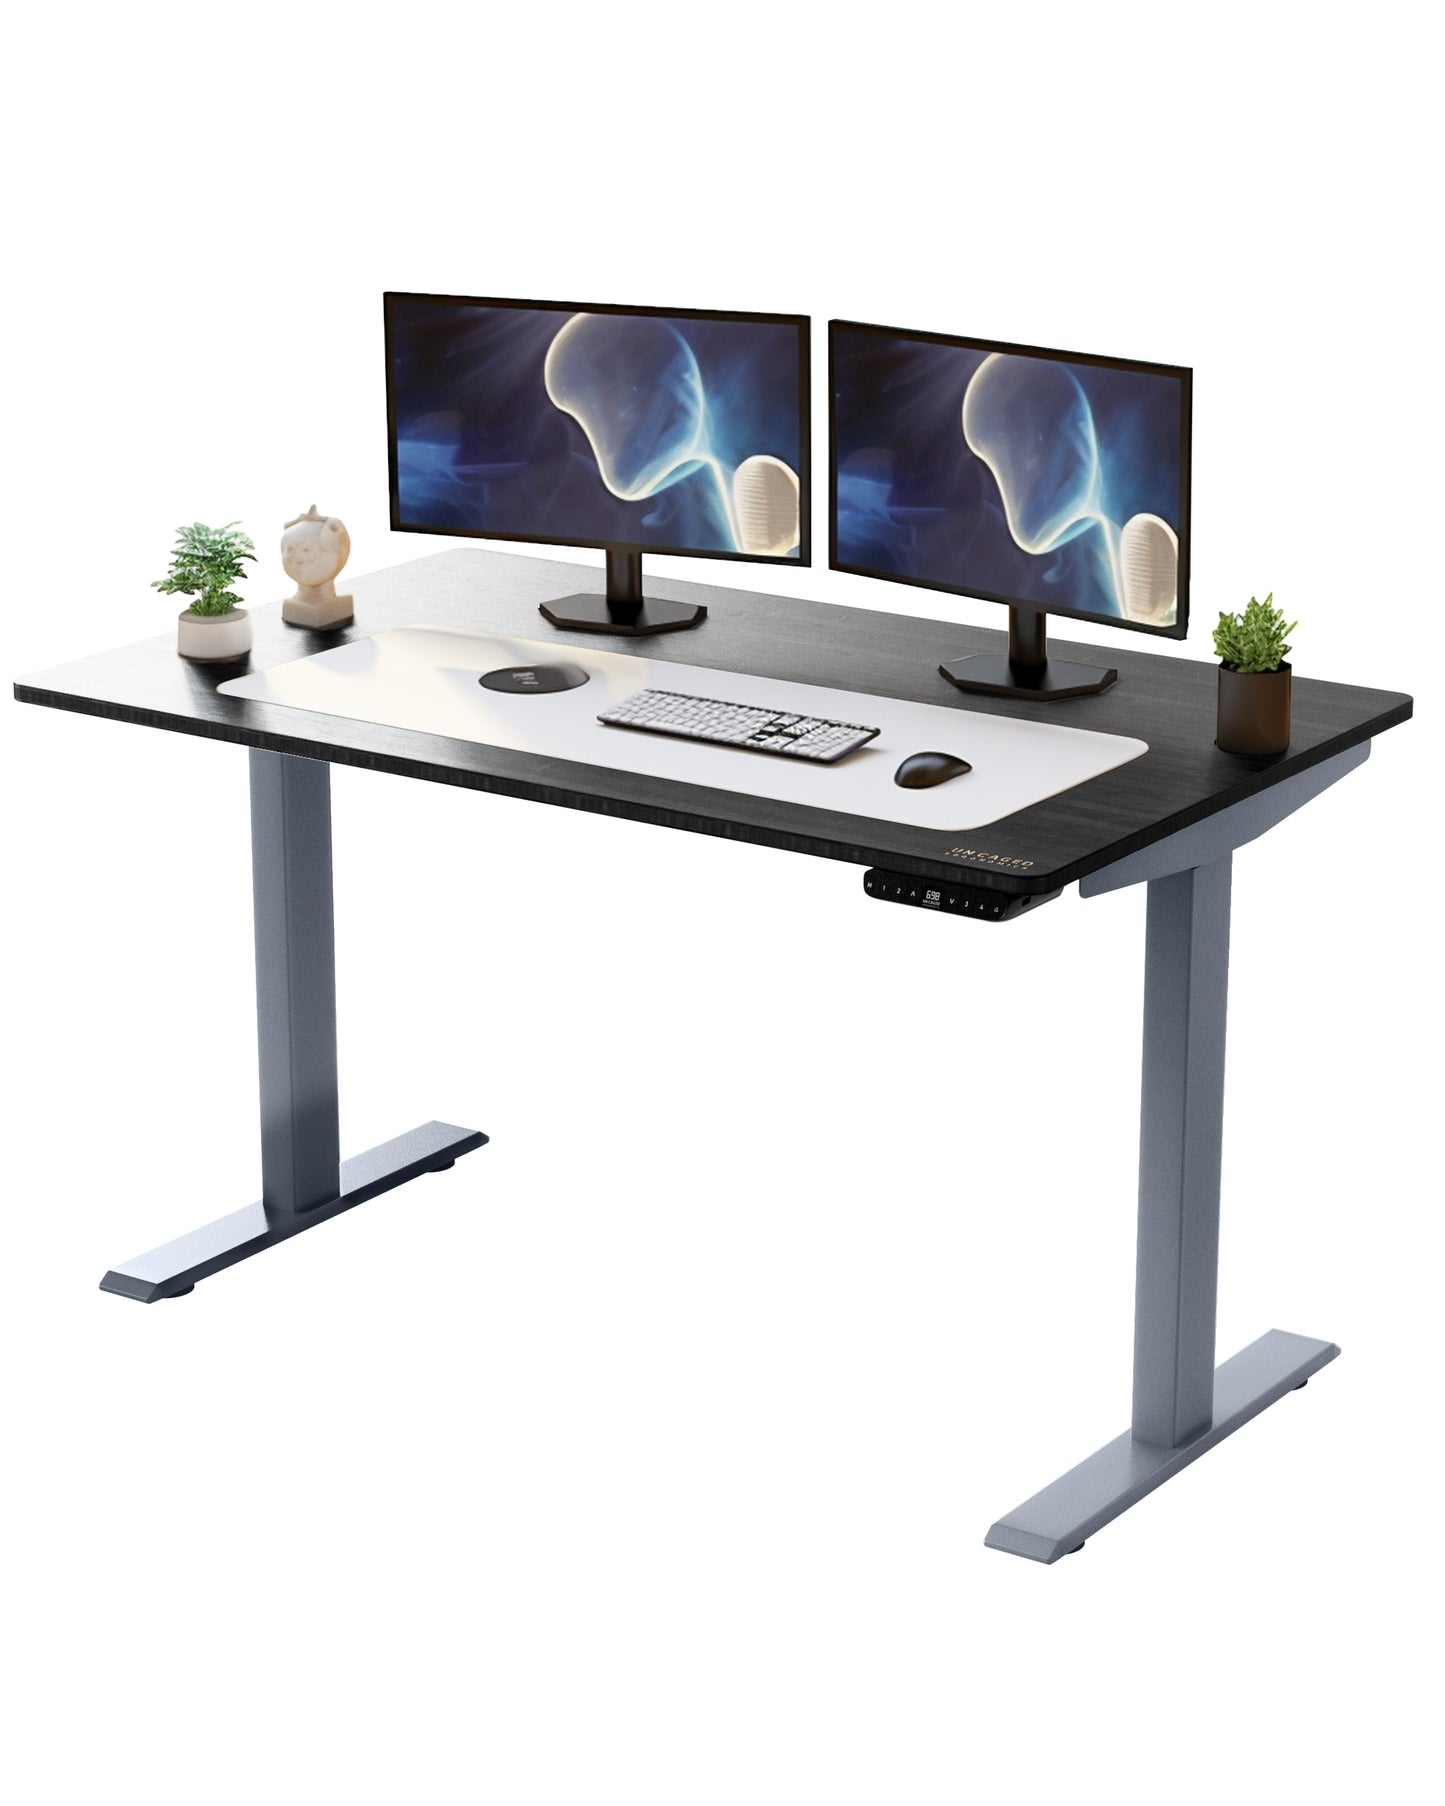 Gray Bamboo Dual Motor Electric Office Adjustable Computer Desk